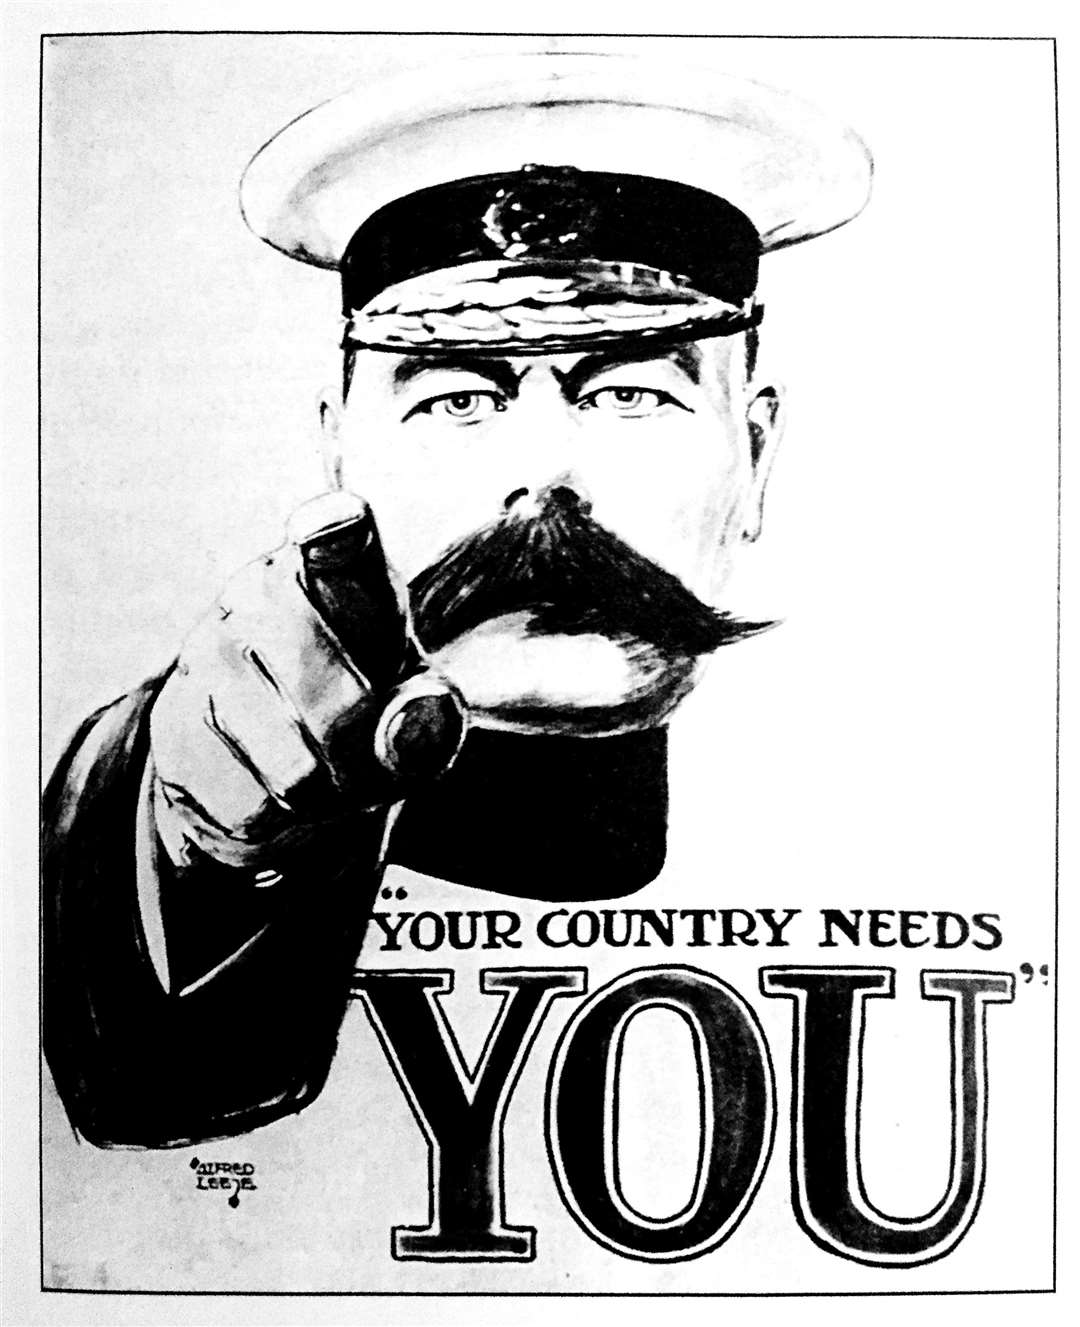 The famous First World War poster